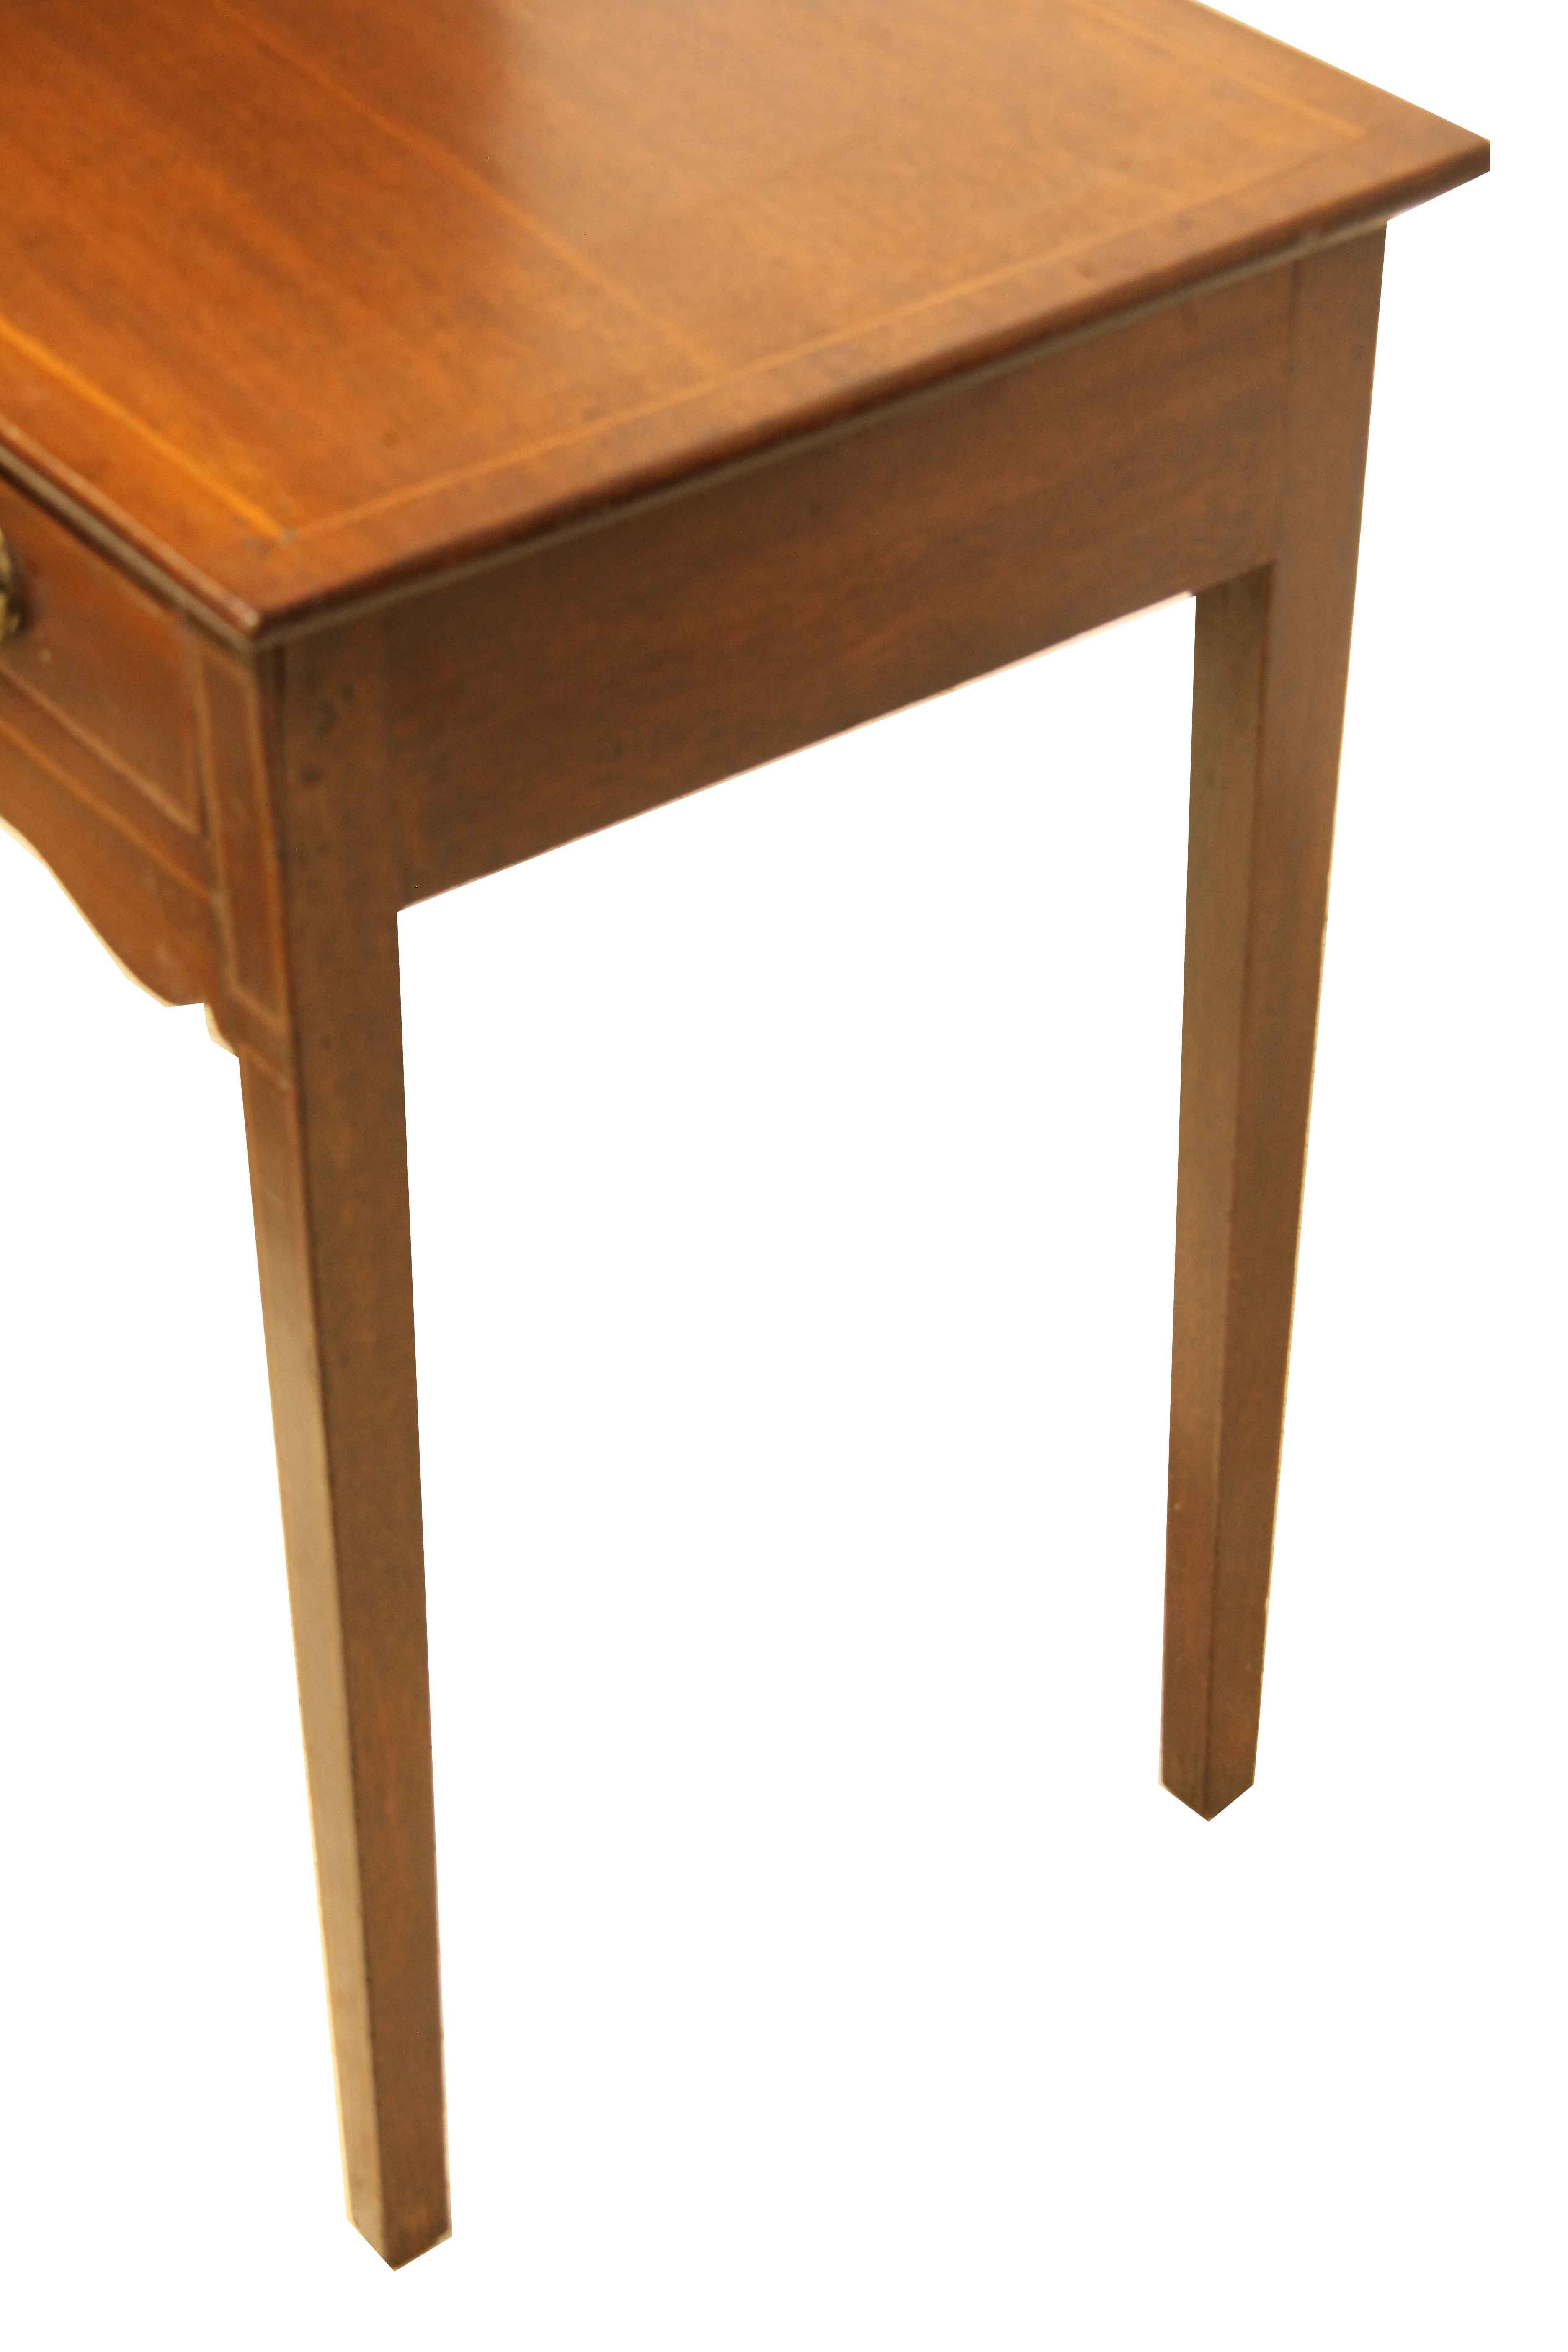 English Hepplewhite One Drawer Table For Sale